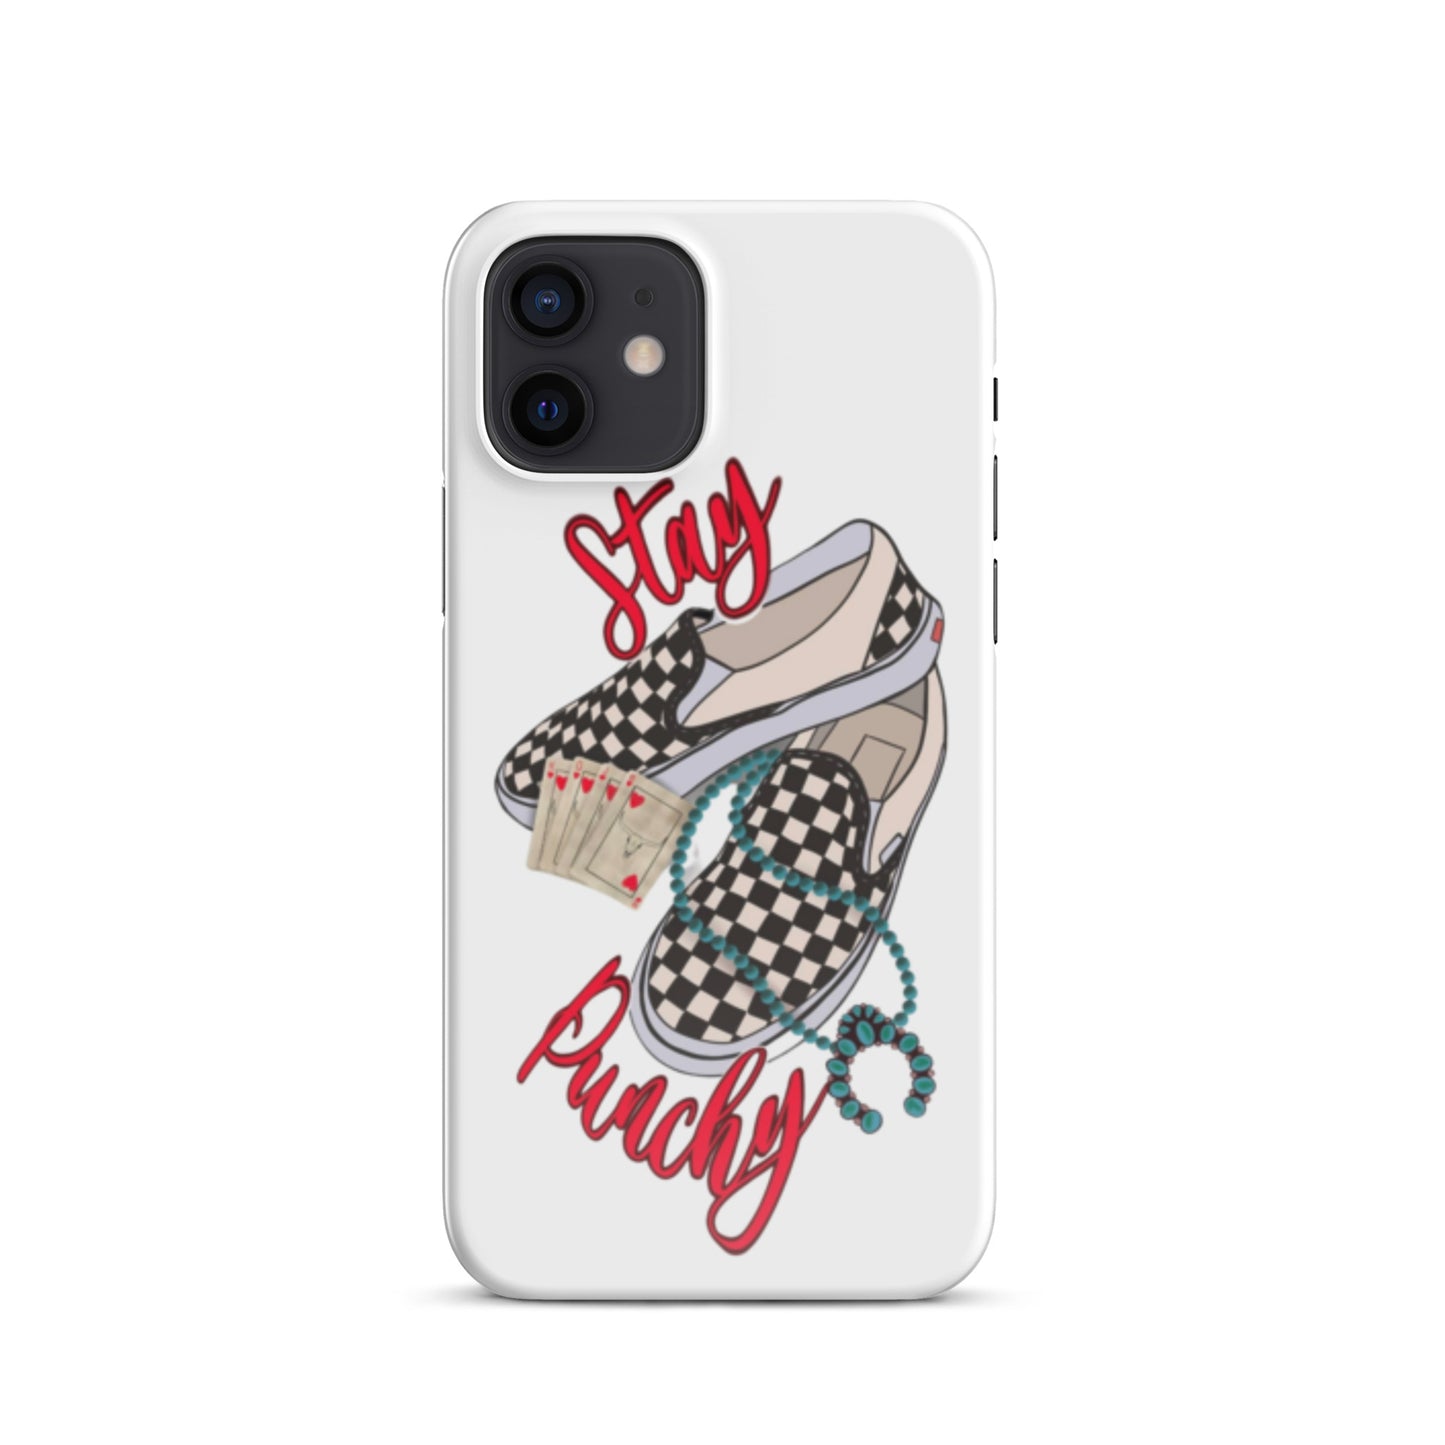 Stay Punchy iphone case